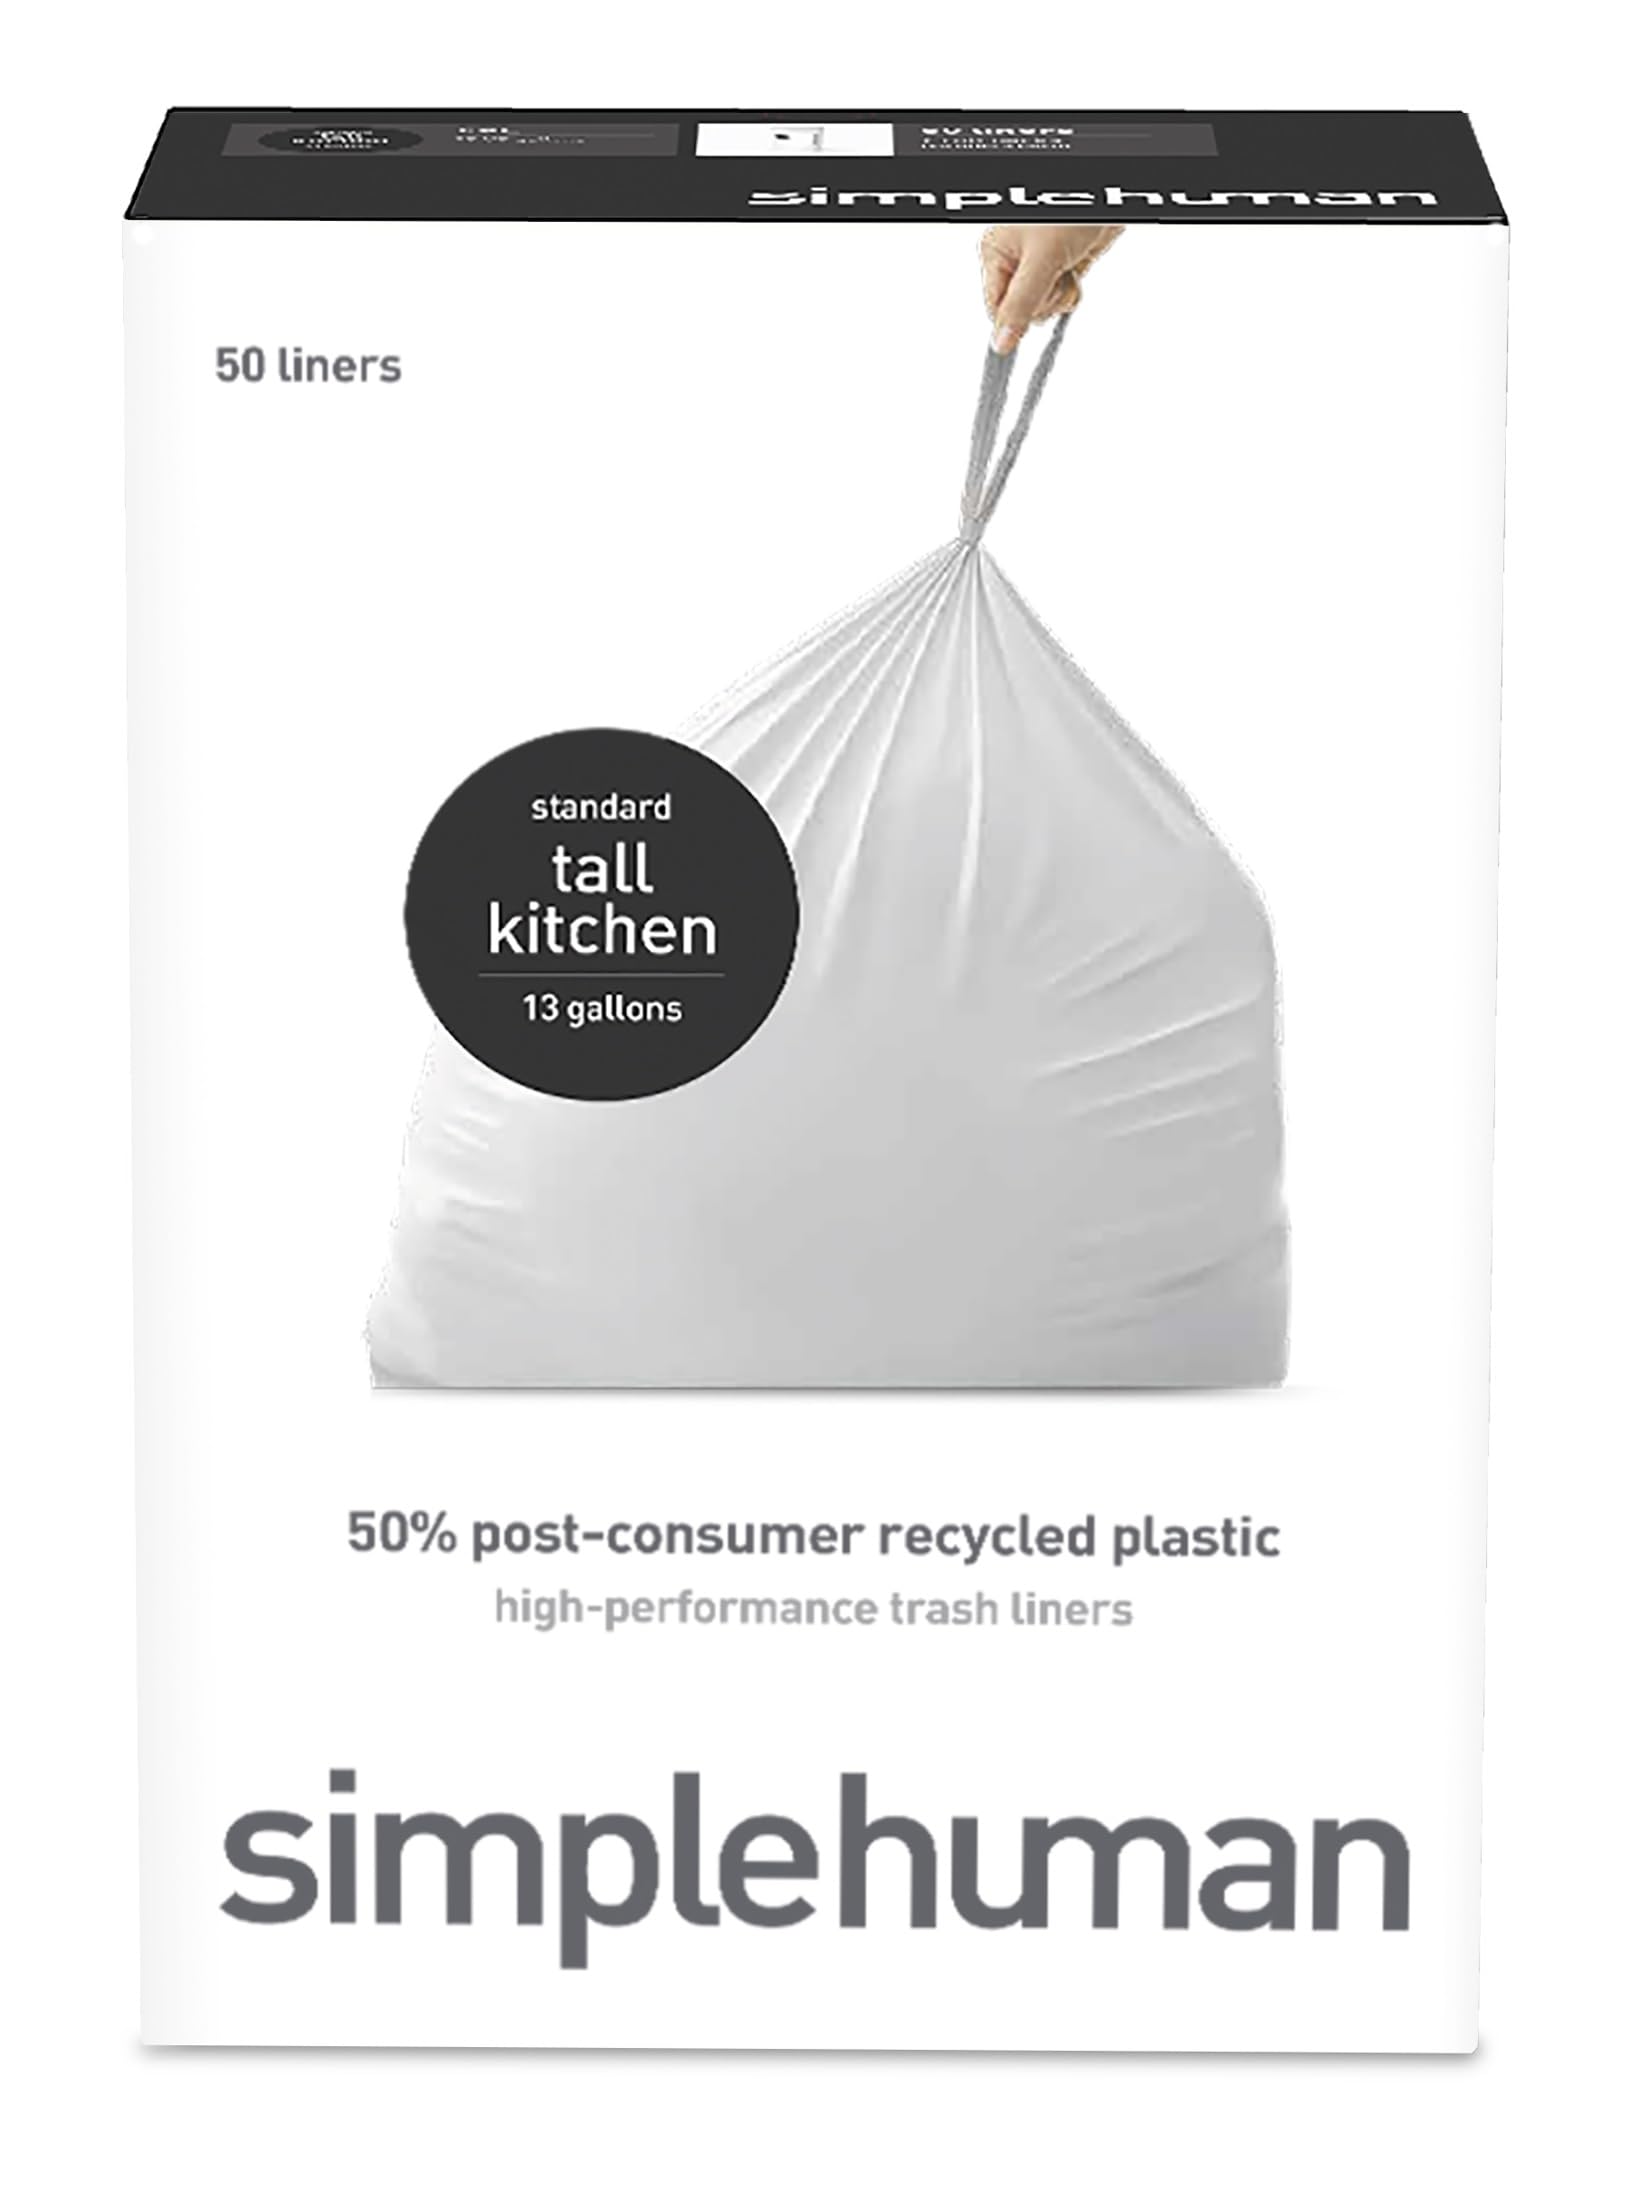 50-Count 13-Gal simplehuman 50% Post-Consumer Recycled Tall Kitchen Drawstring Trash Bags $7.98 (.16c Ea) w/ S&S + Free Shipping w/ Prime or on $35+